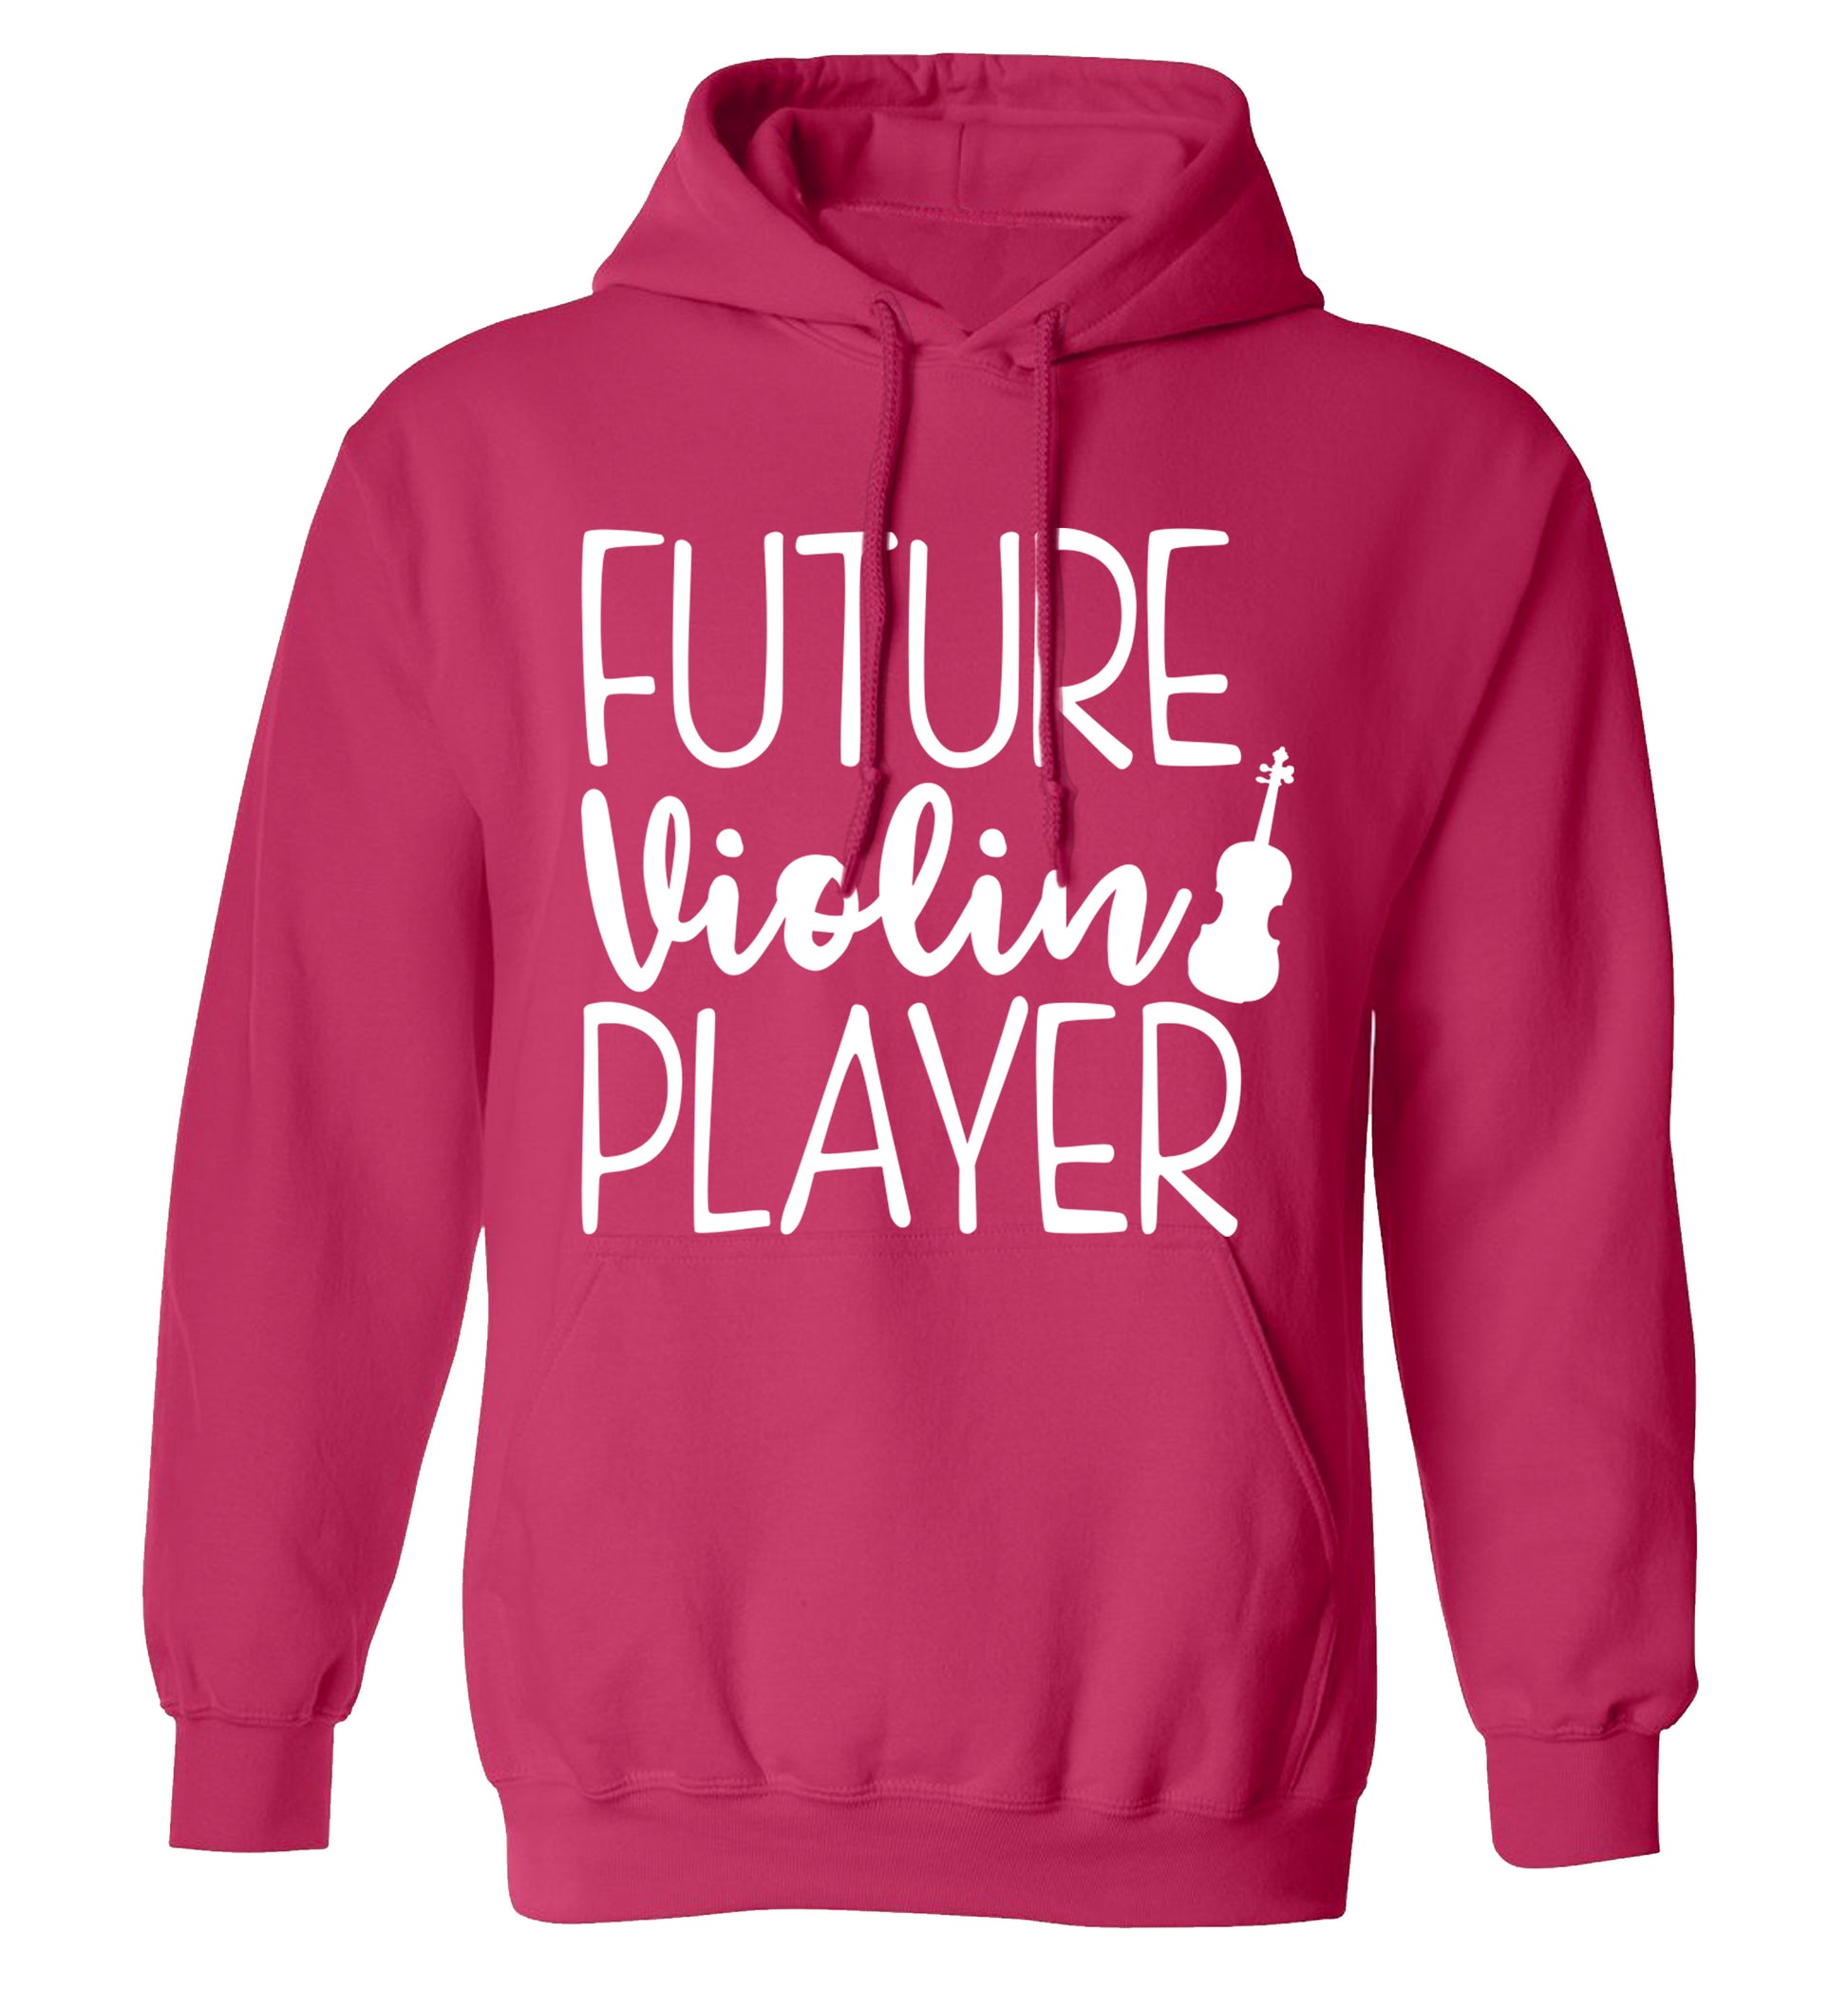 Future Violin Player adults unisex pink hoodie 2XL